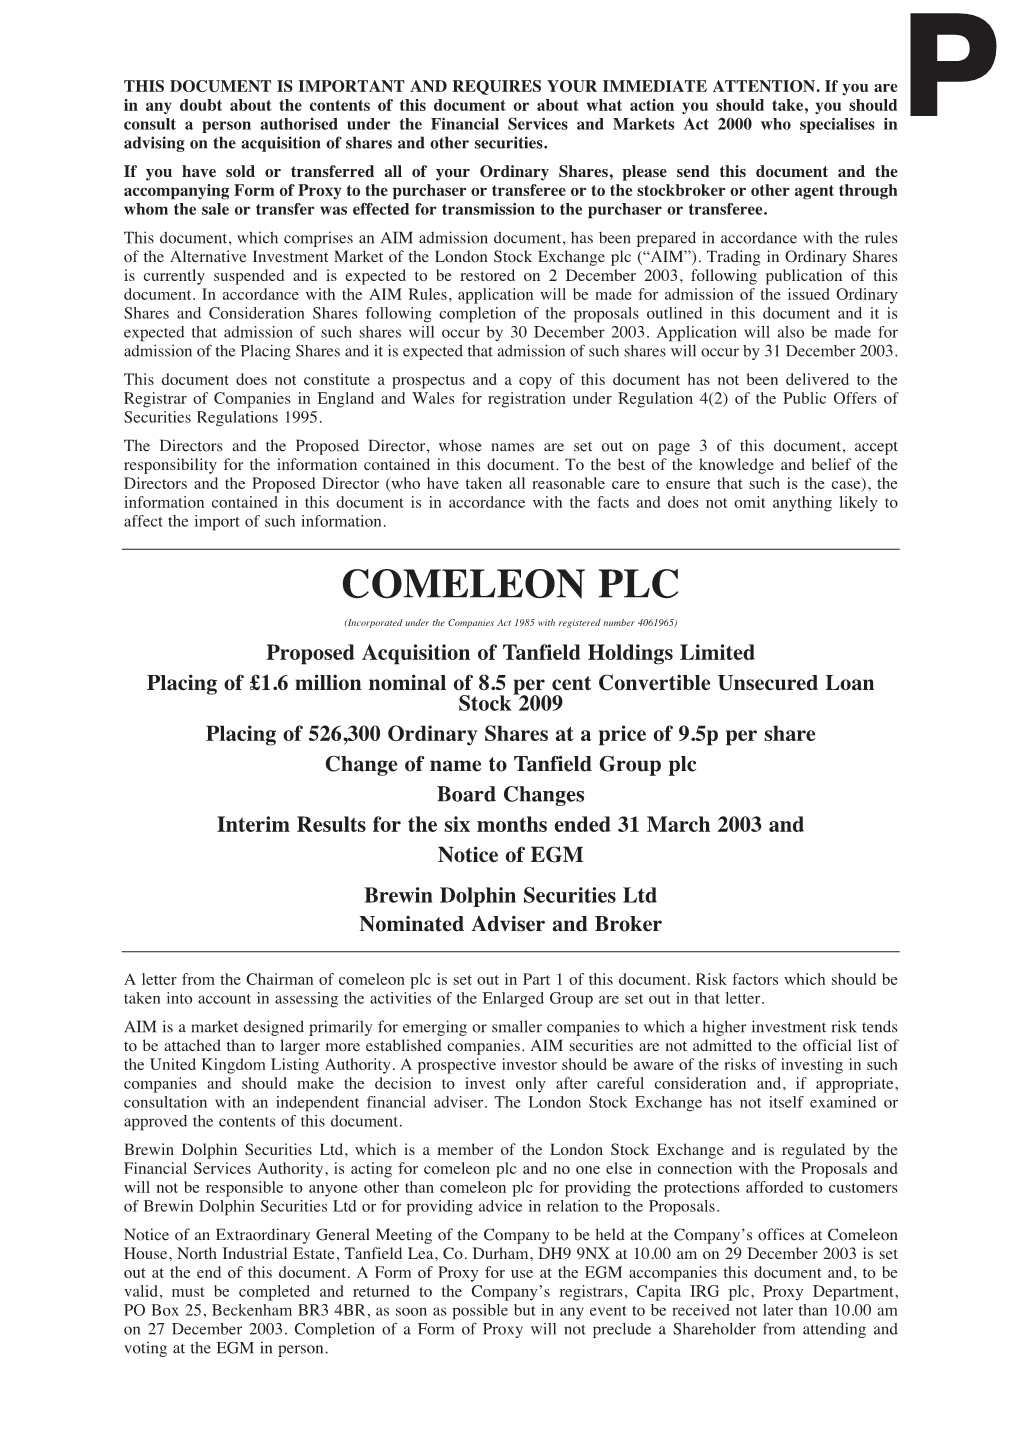 AIM Admission Document, Has Been Prepared in Accordance with the Rules of the Alternative Investment Market of the London Stock Exchange Plc (“AIM”)